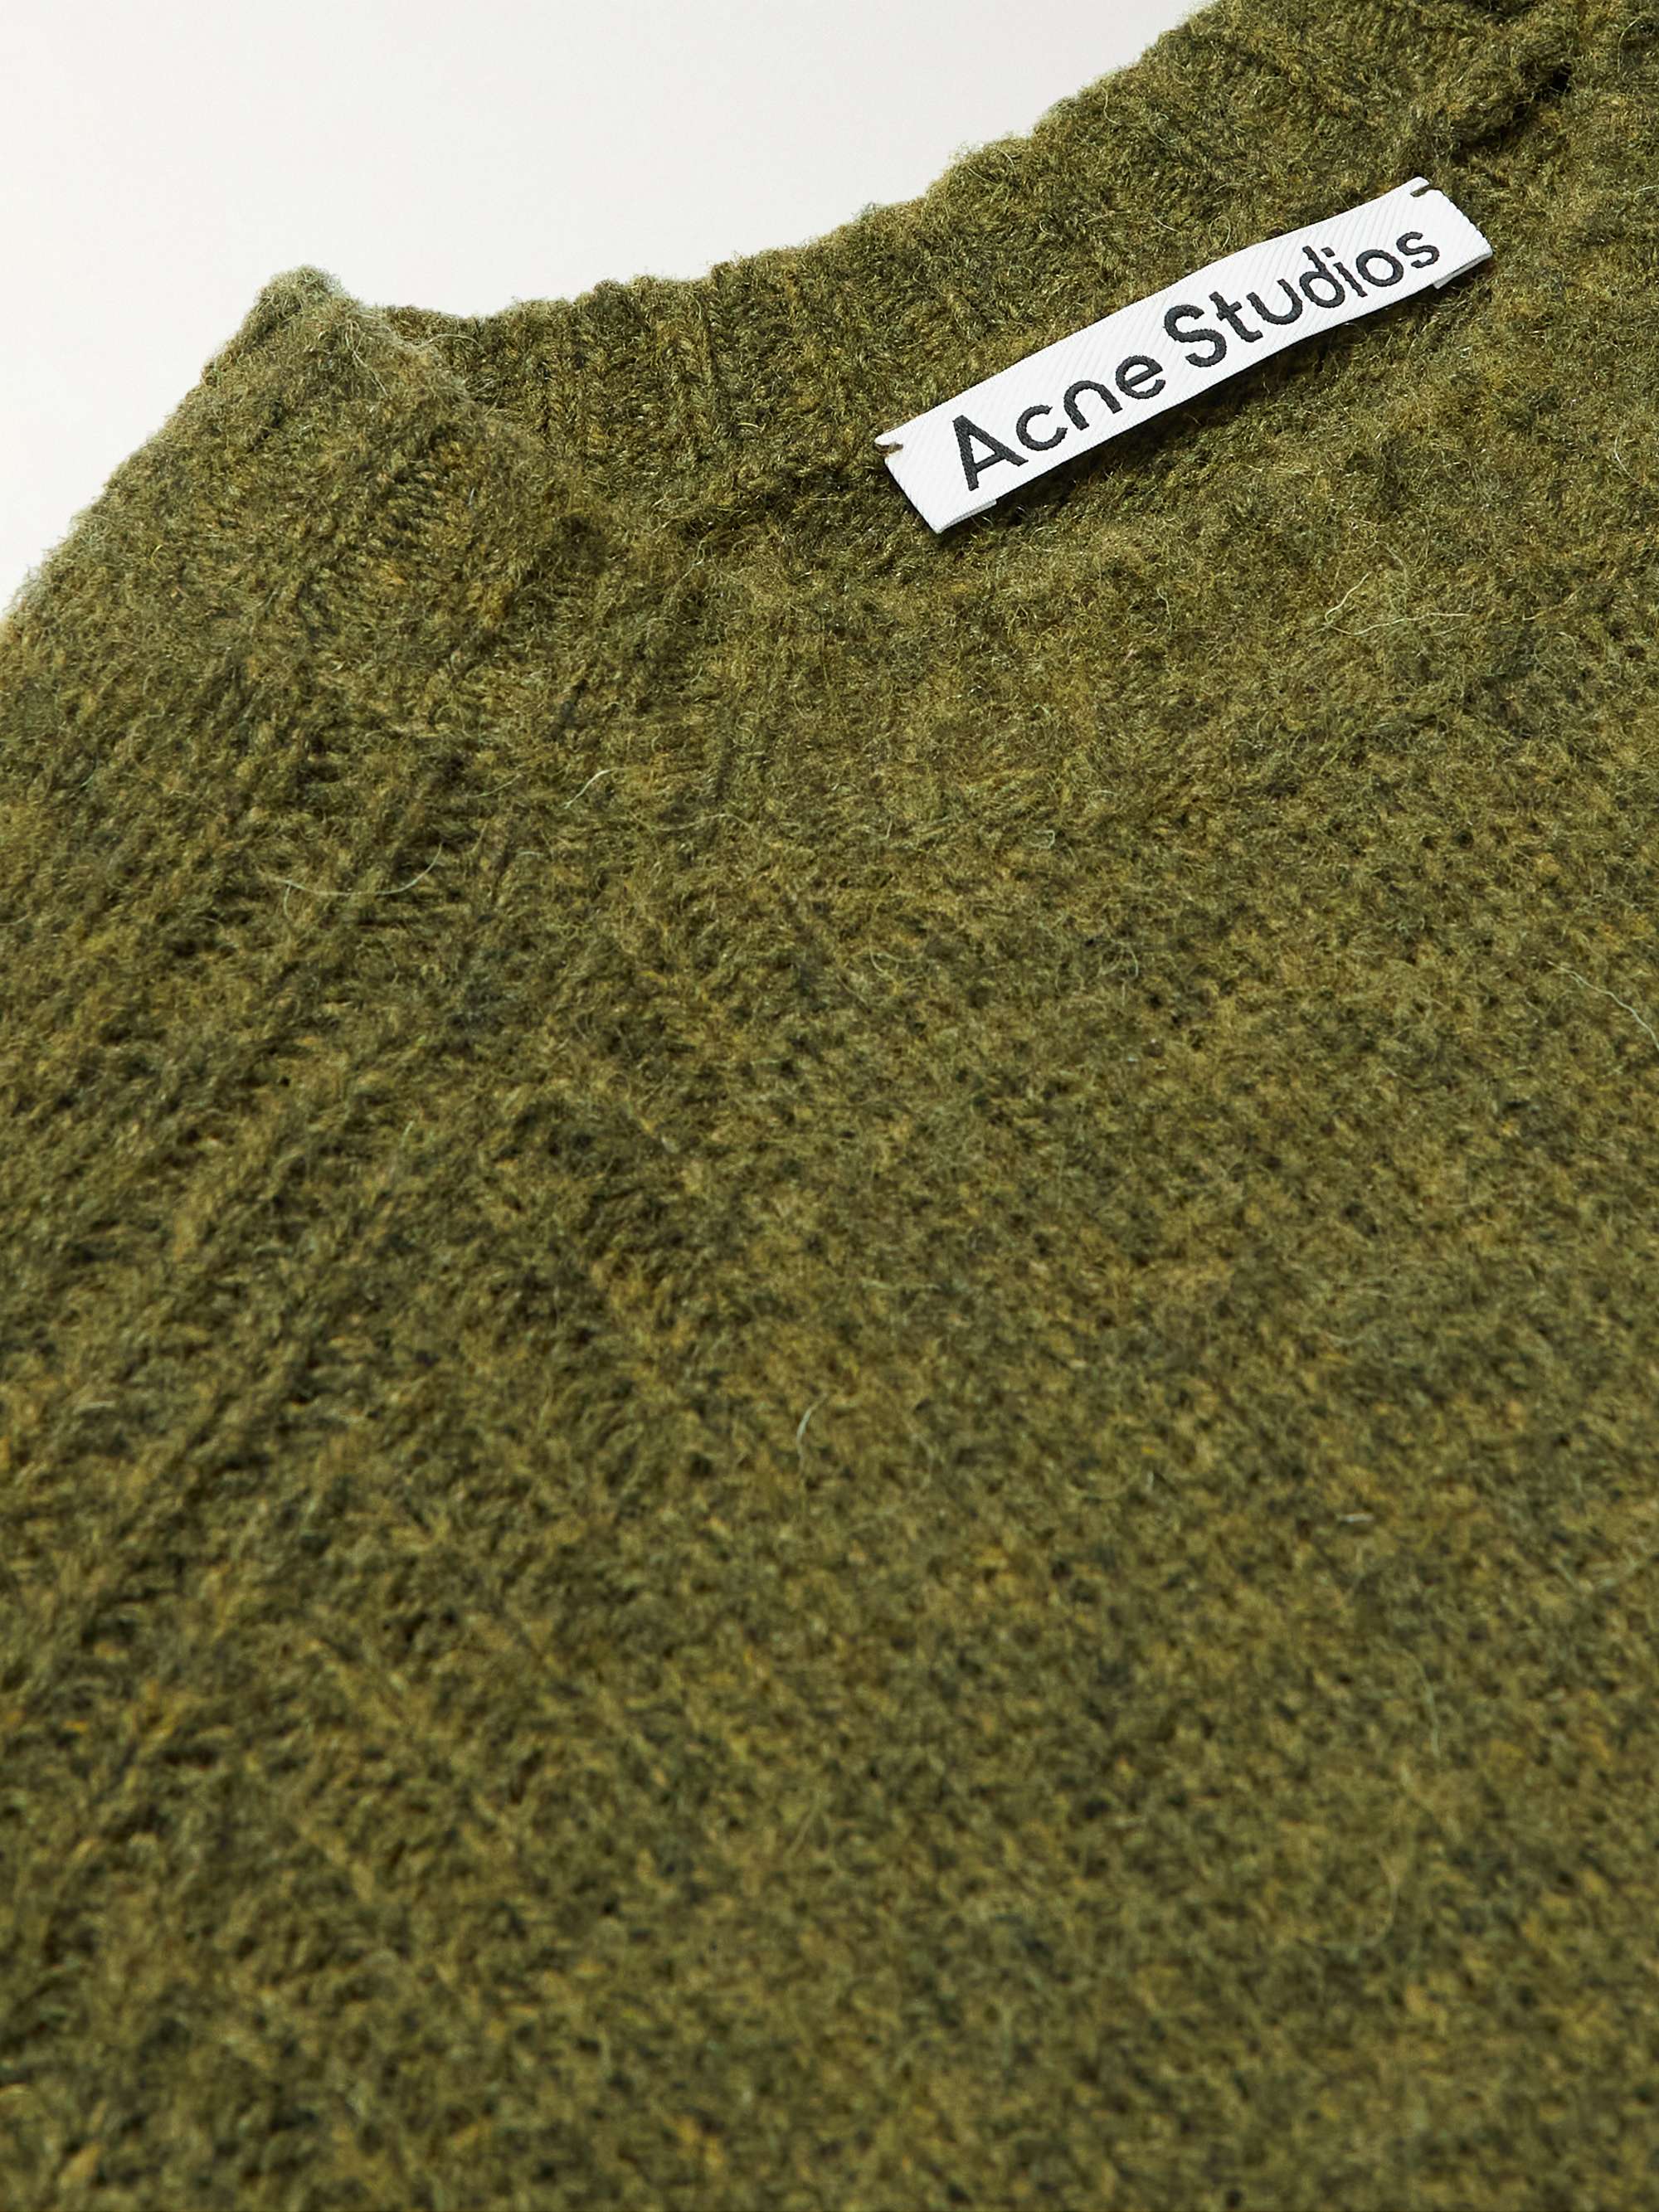 ACNE STUDIOS Kowhai Logo-Embroidered Wool Sweater